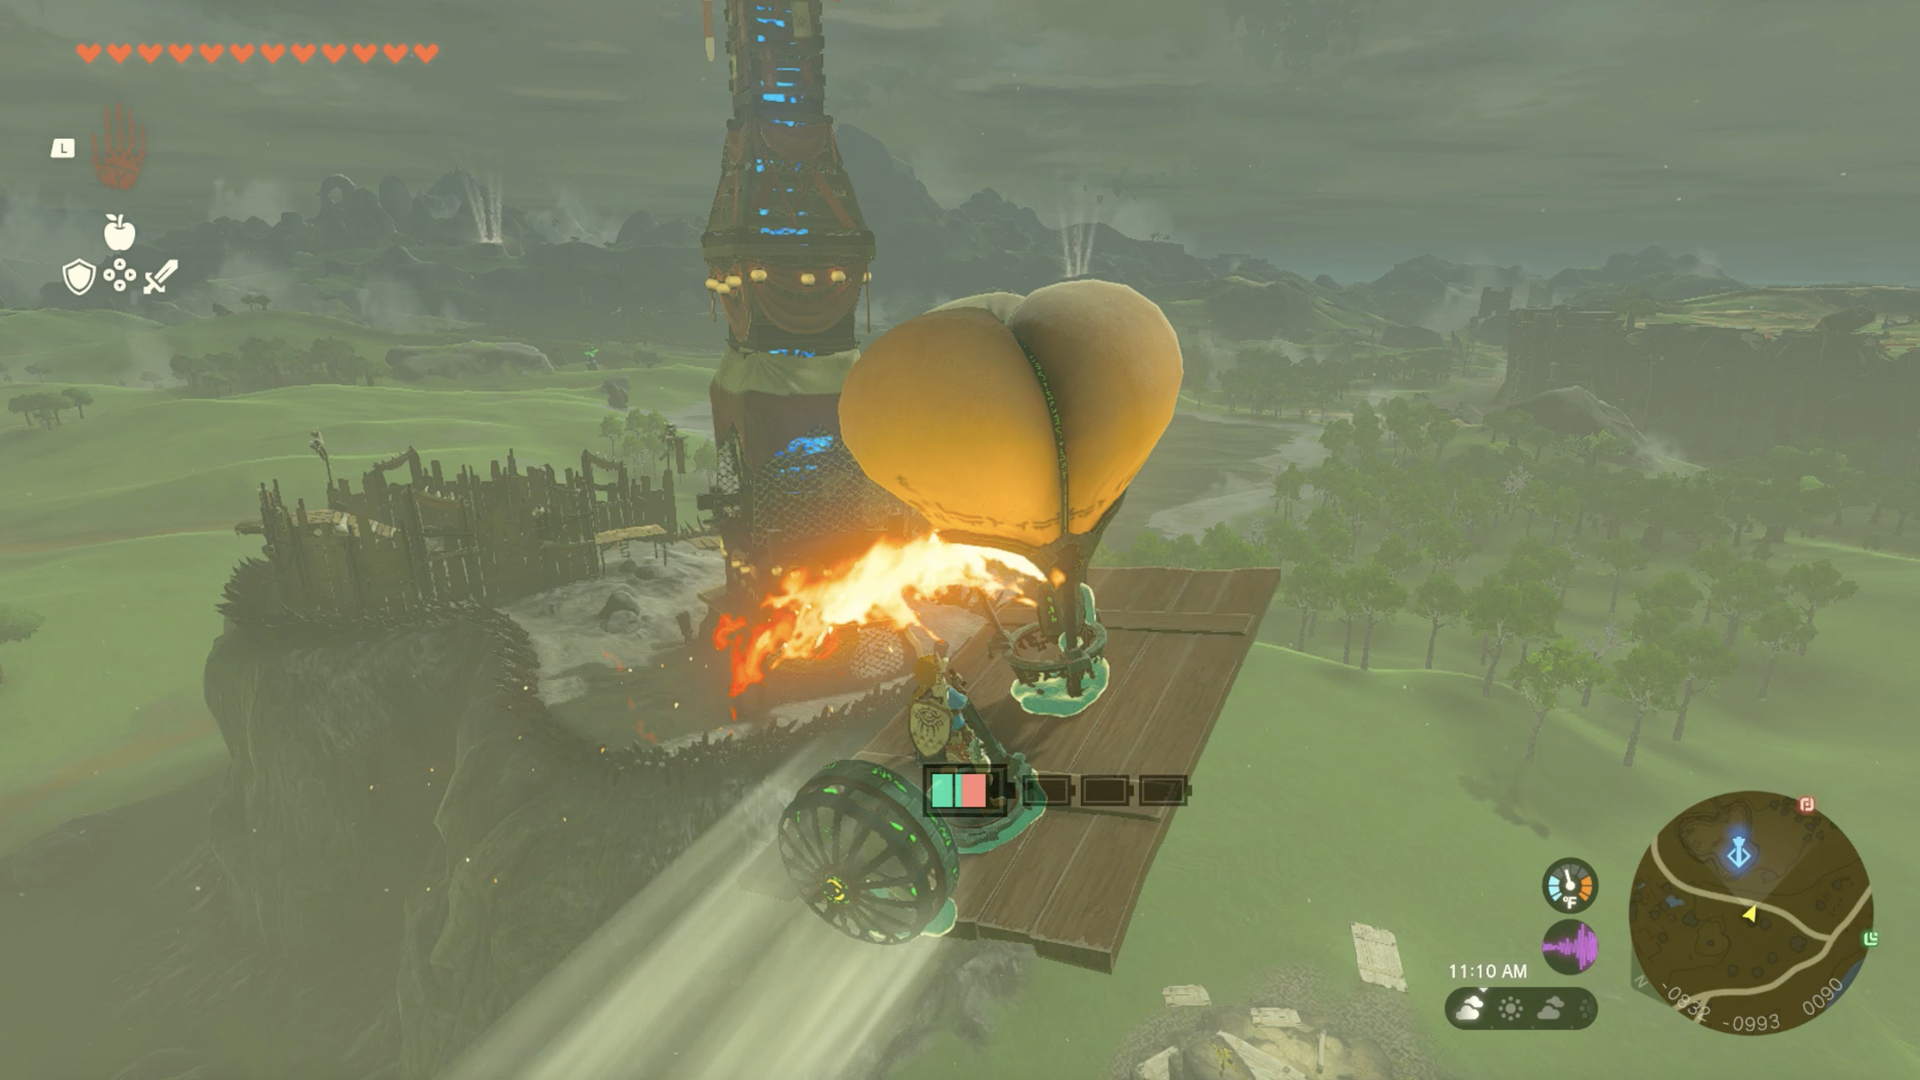 Zelda video game hero Link stands on a flying platform, propelled through the air by a fan